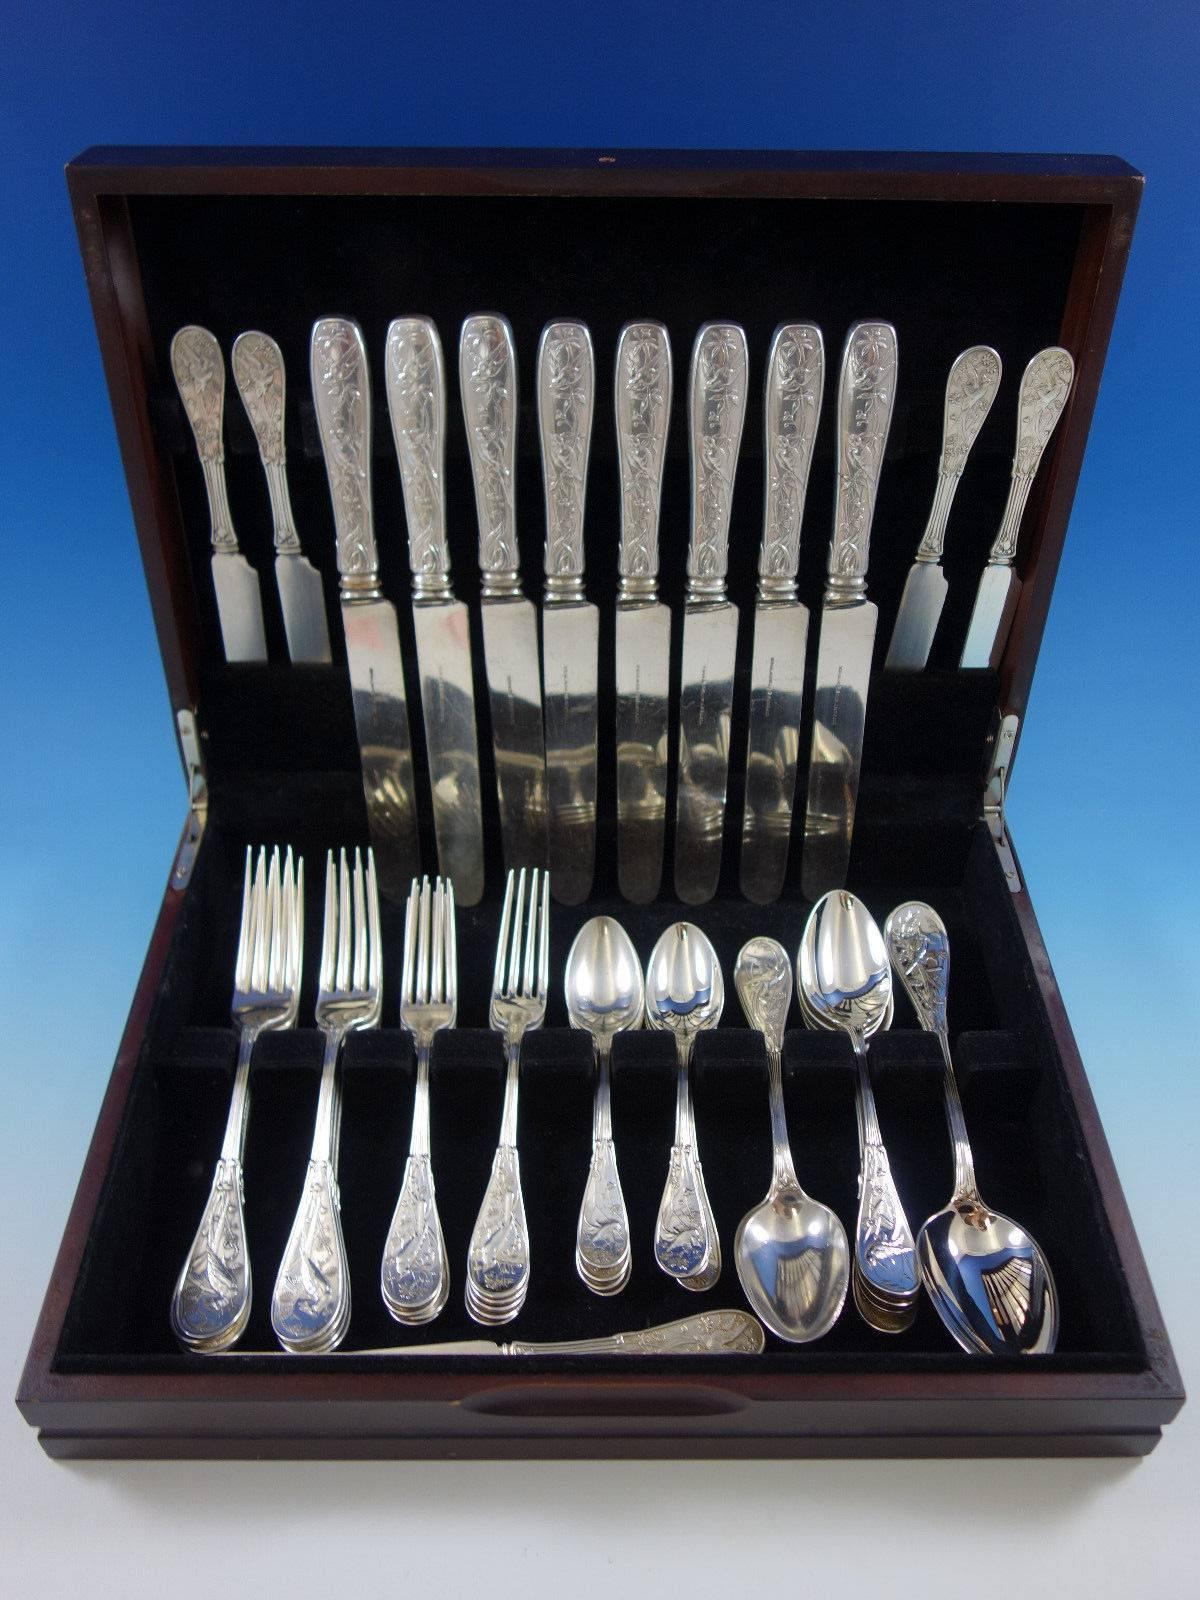 Dinner size Japanese by Tiffany & Co. Sterling silver flatware set of 50 pieces. This set includes: Eight dinner size knives, 10